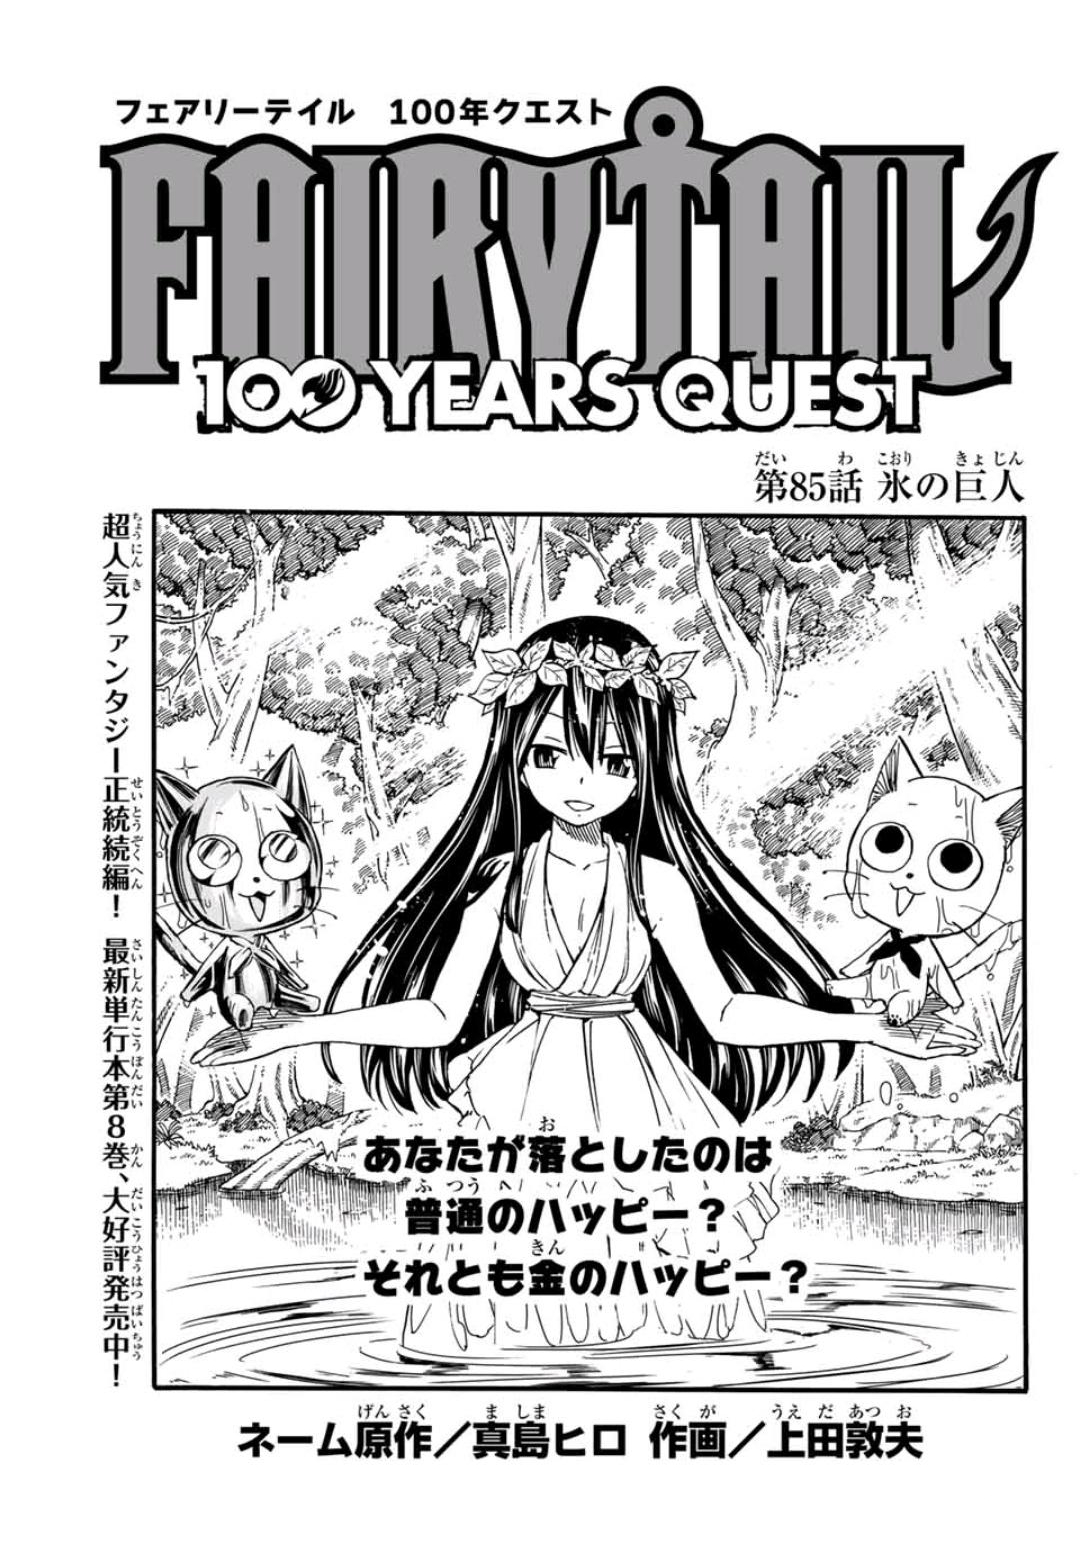 Fairy Tail: 100 Years Quest - Wikipedia